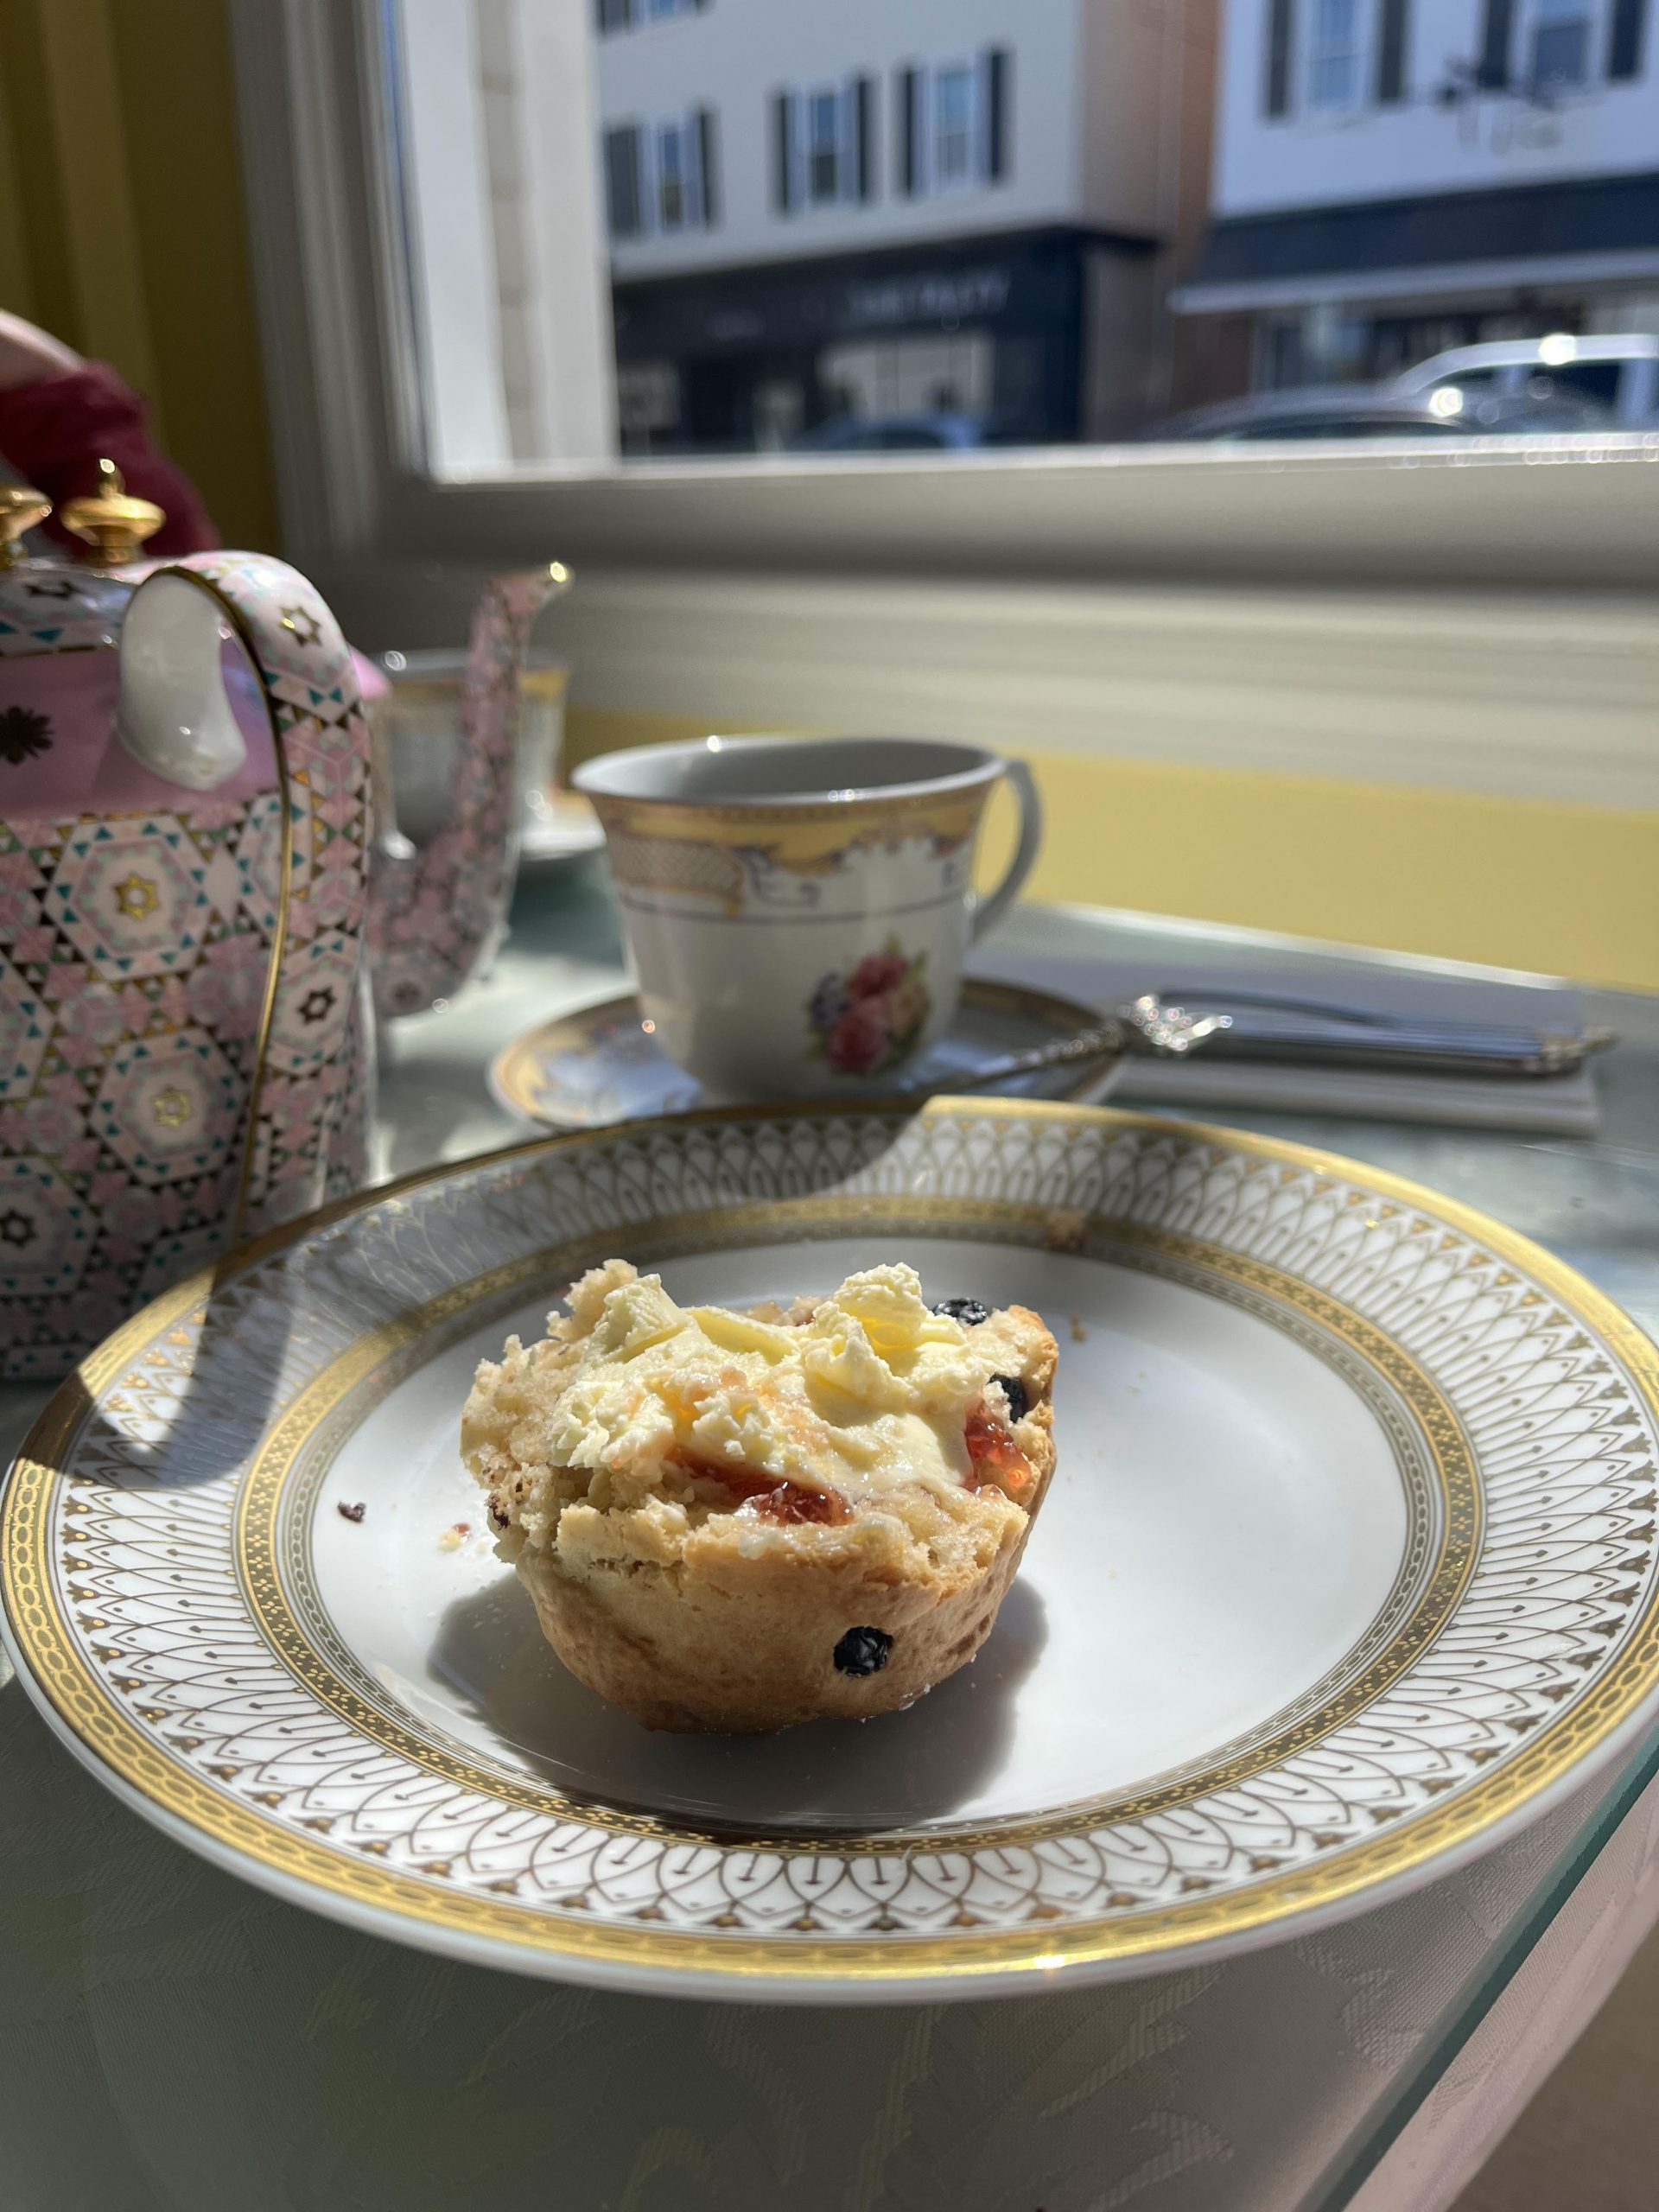 Half of a scone on a gold rimmed china plate is topped with jam and cream. A china tea cup with a gold rim and a pink rose design is behind the plate with a pink patterned teapot handle visible to the left of the cup.